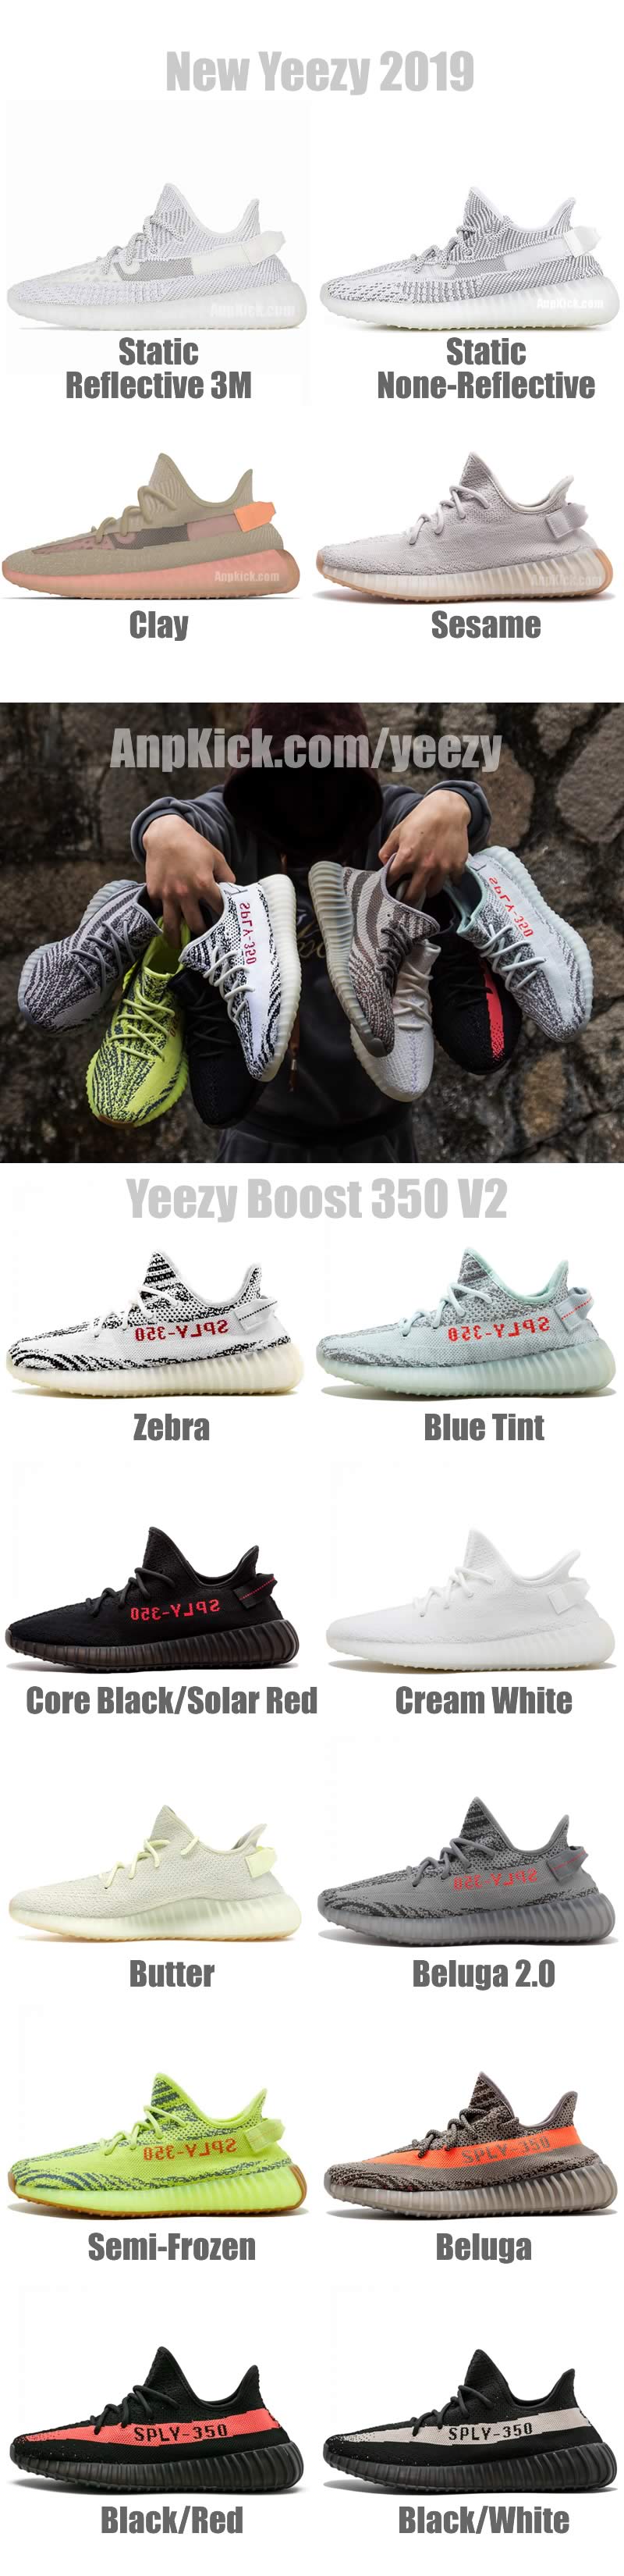 buy 2019 new yeezy boost 350 v2 shoes